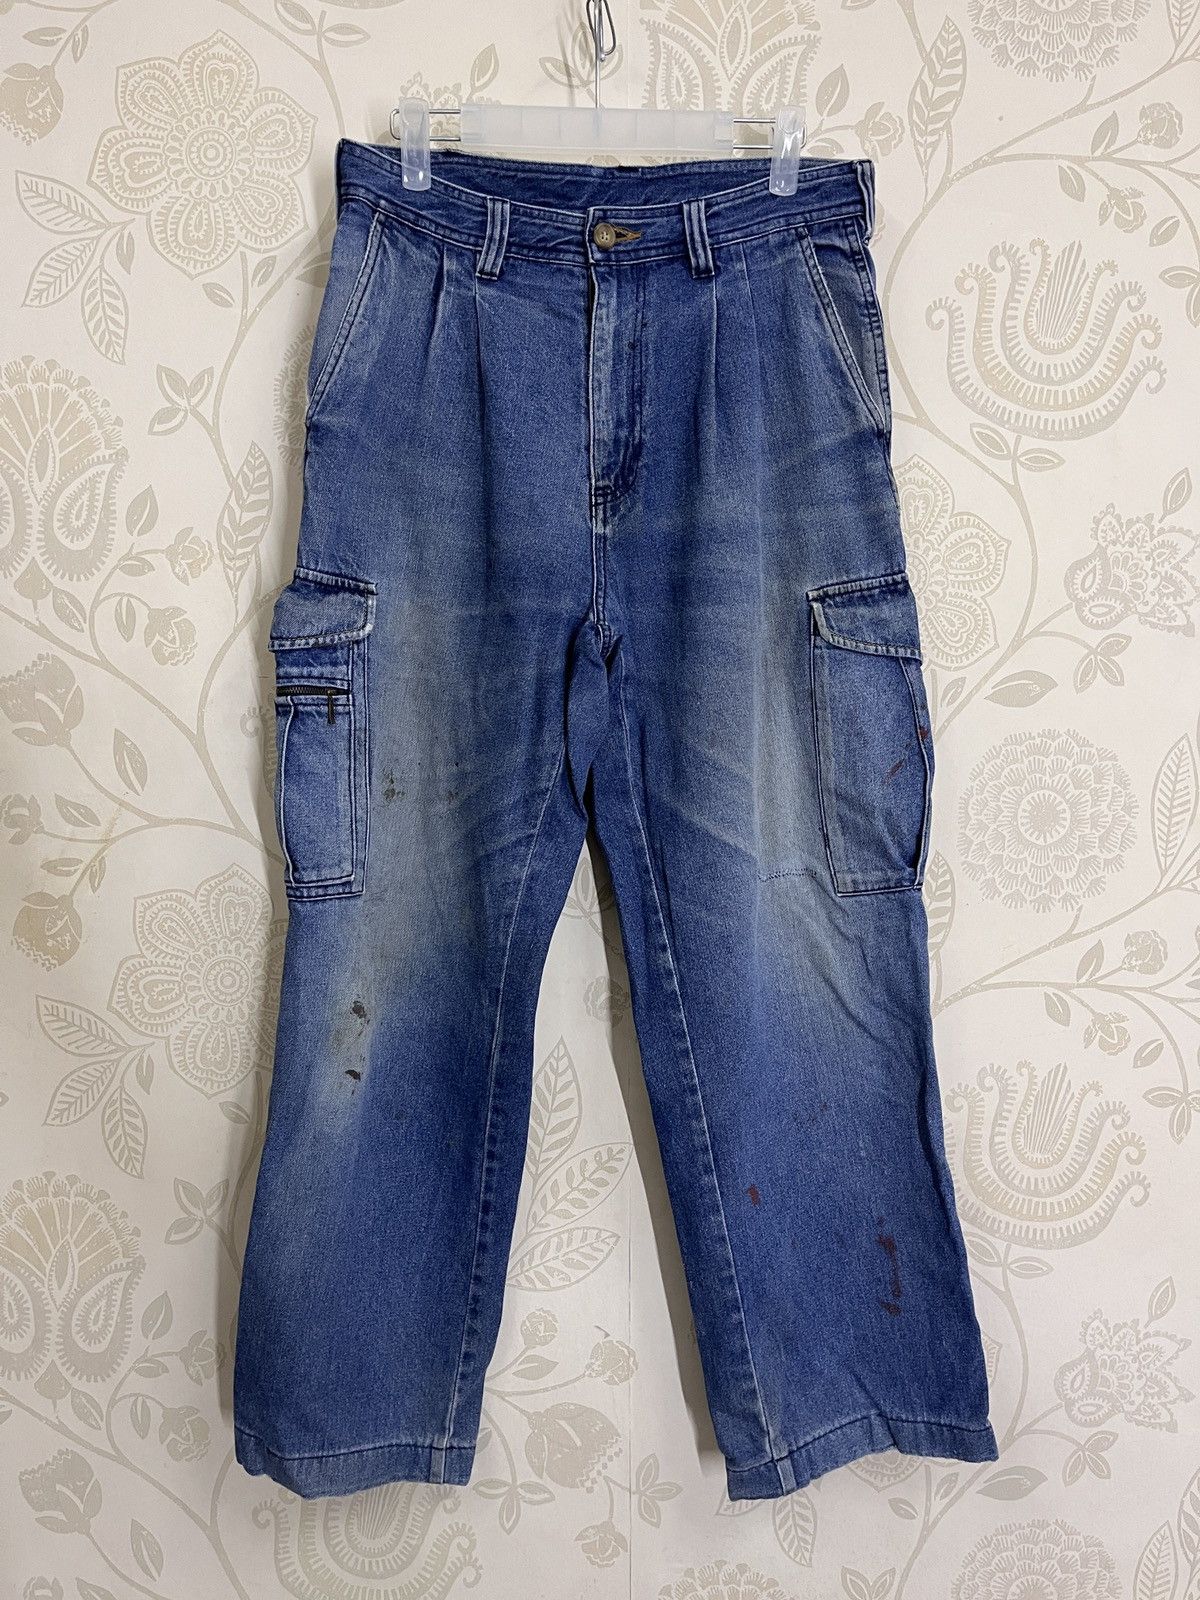 Distressed Denim - Worn Even River Japanese Cargo Denim Ripped Baggy Style - 1